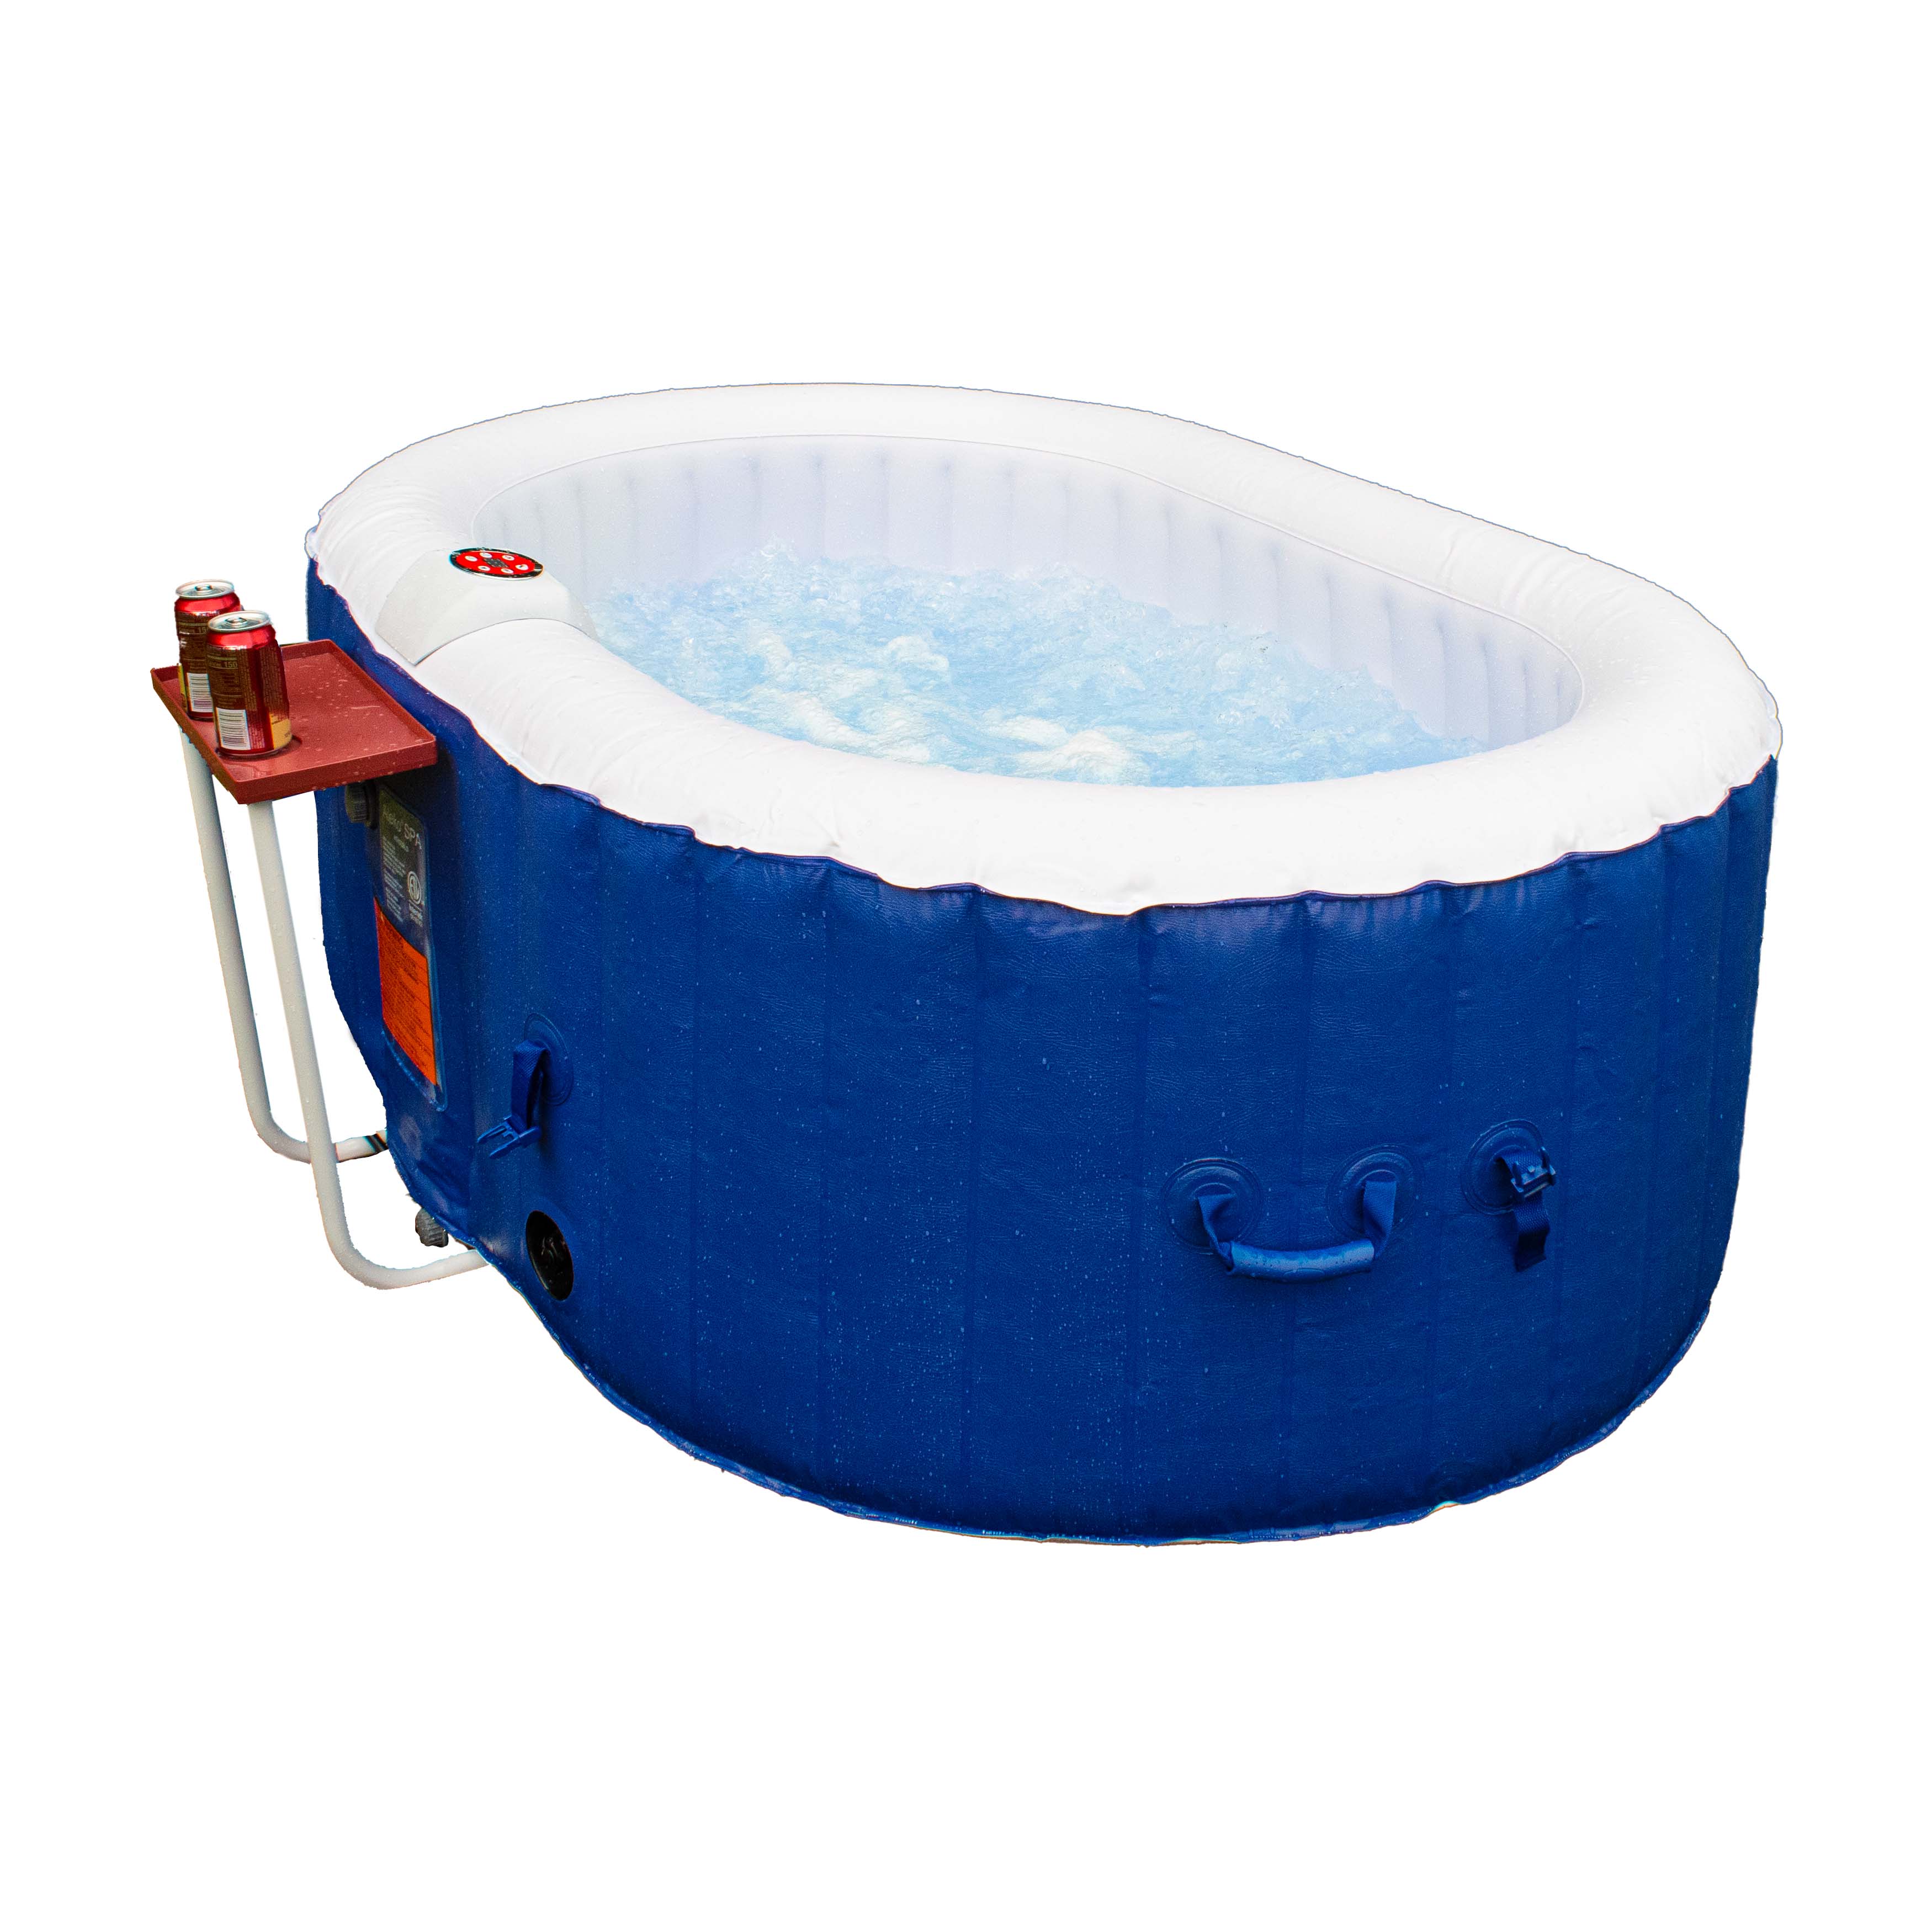 ALEKO Oval Inflatable Dark Blue 2 Person Hot Tub Spa with Drink Tray and Cover - image 4 of 14